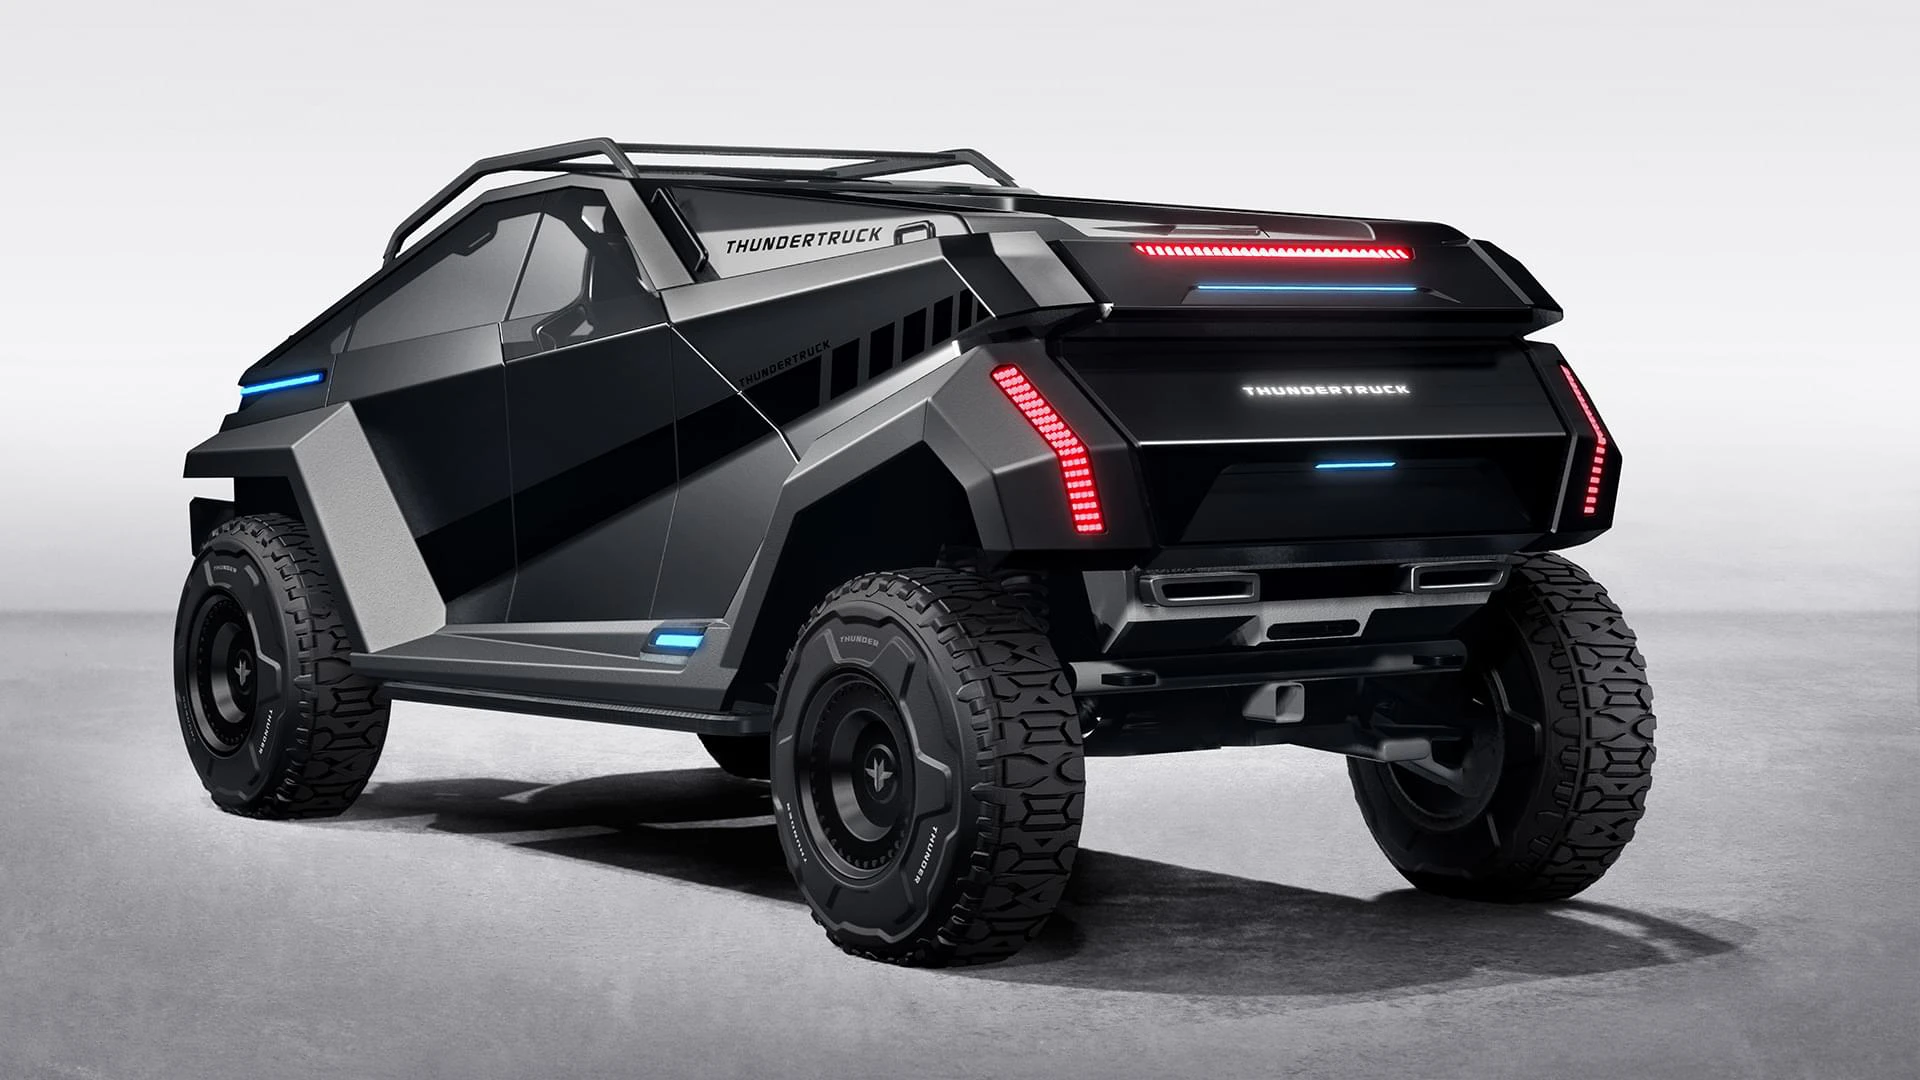 Wolfgang L.A. 'Thundertruck' Off-Road Electric Pickup